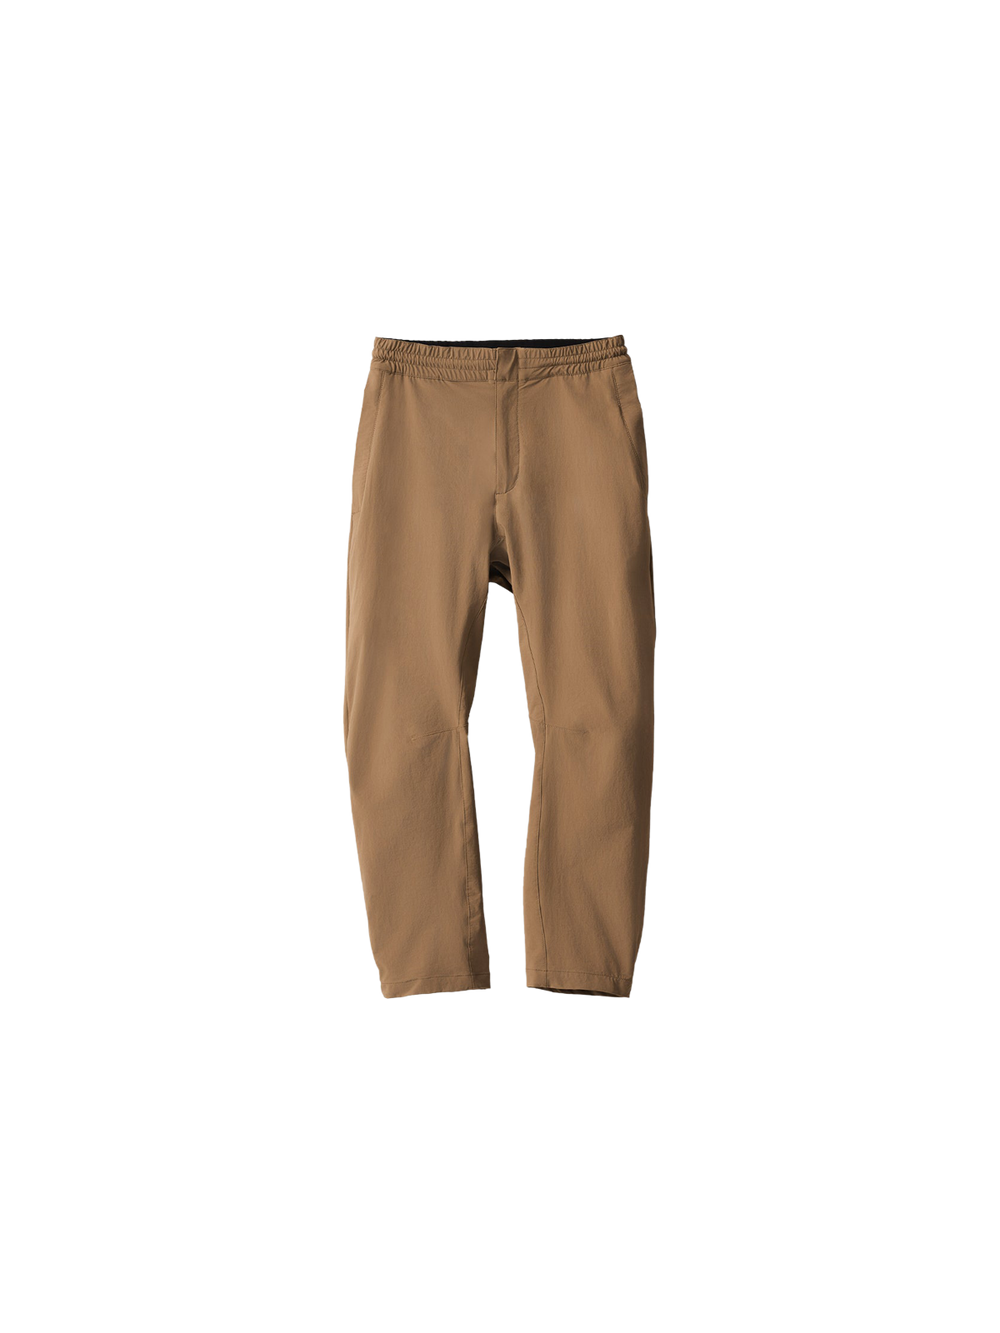 Product Image for Motion Pant 2.0